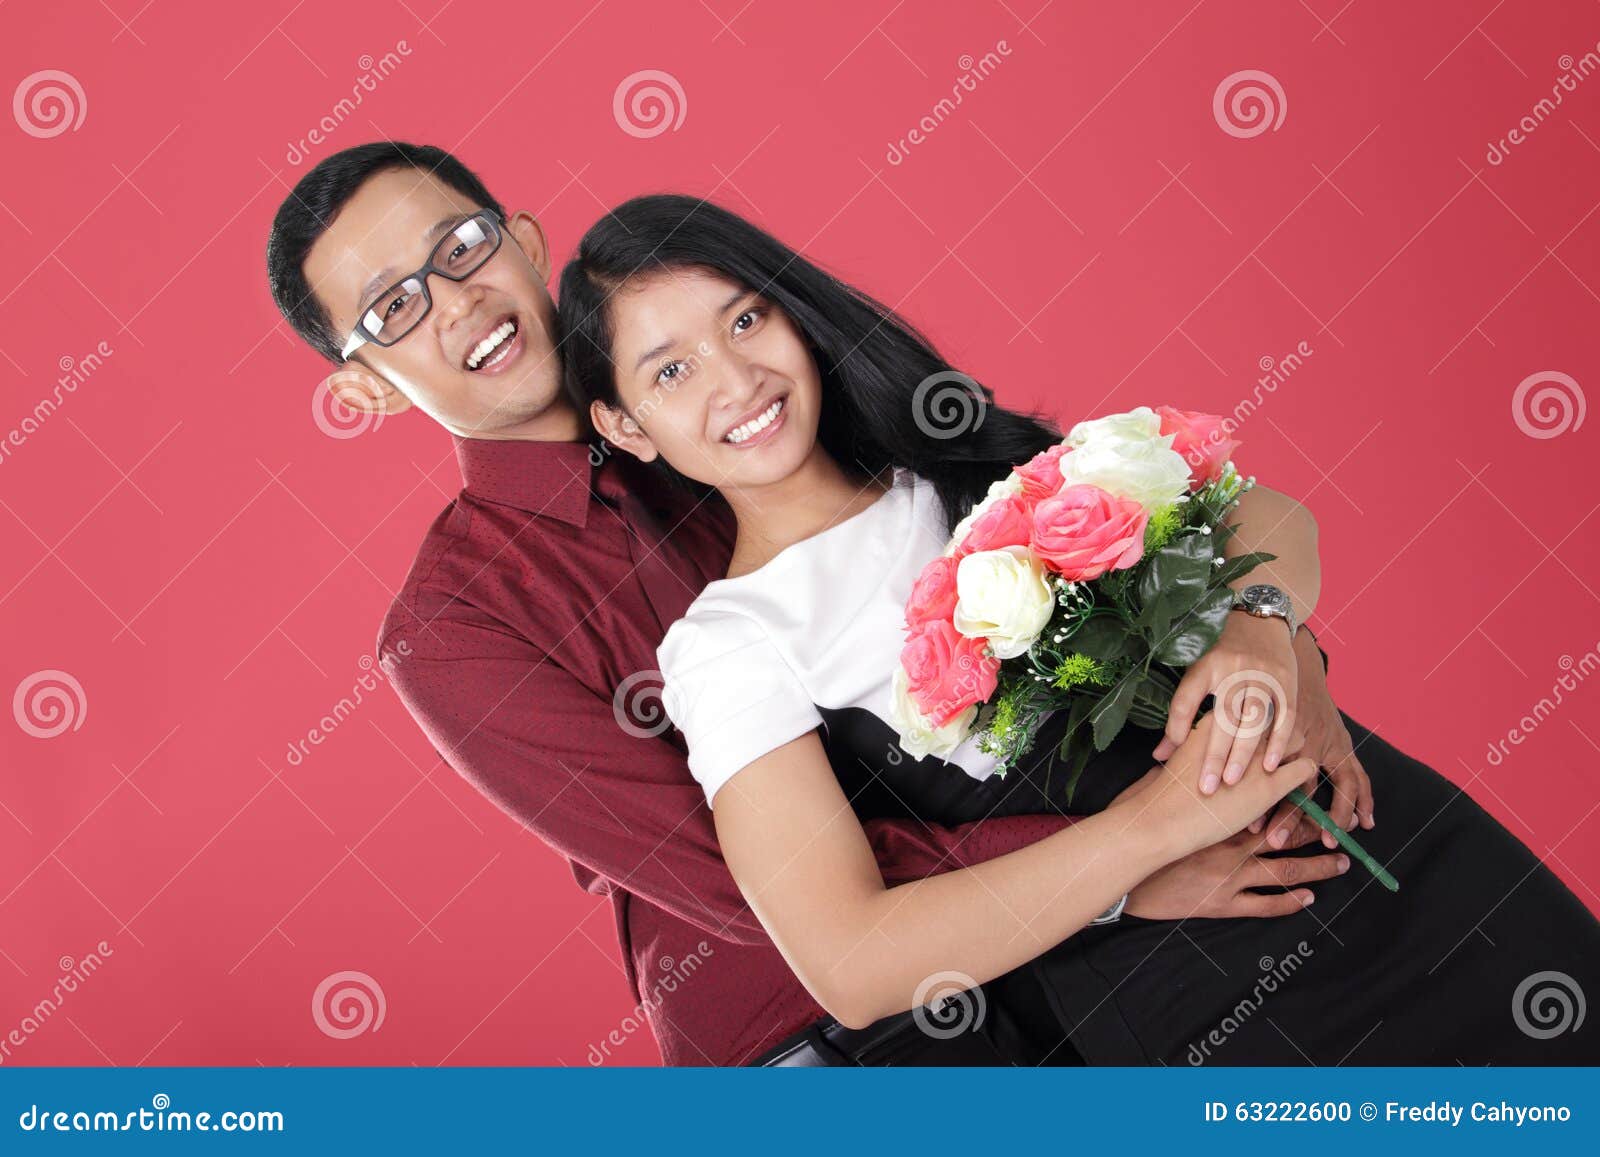 Romantic Asian Teen Couple Smile And Pose With Intimate